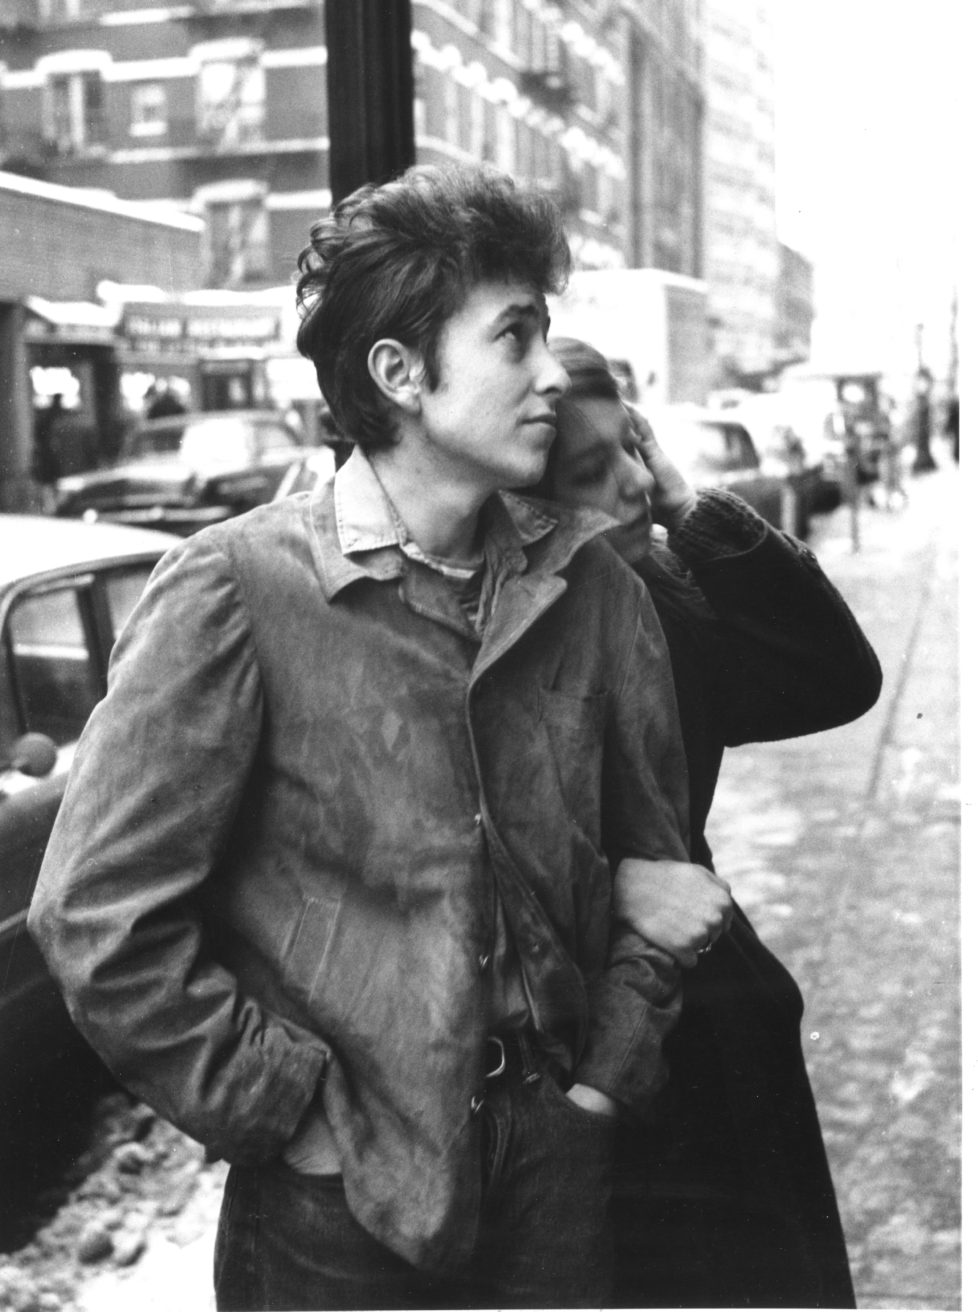 NEW YORK - SEPTEMBER 1961: Bob Dylan walking with his girlfriend Suze Rotolo in September 1961 in New York City, New York. (Photo by Michael Ochs Archives/Getty Images)